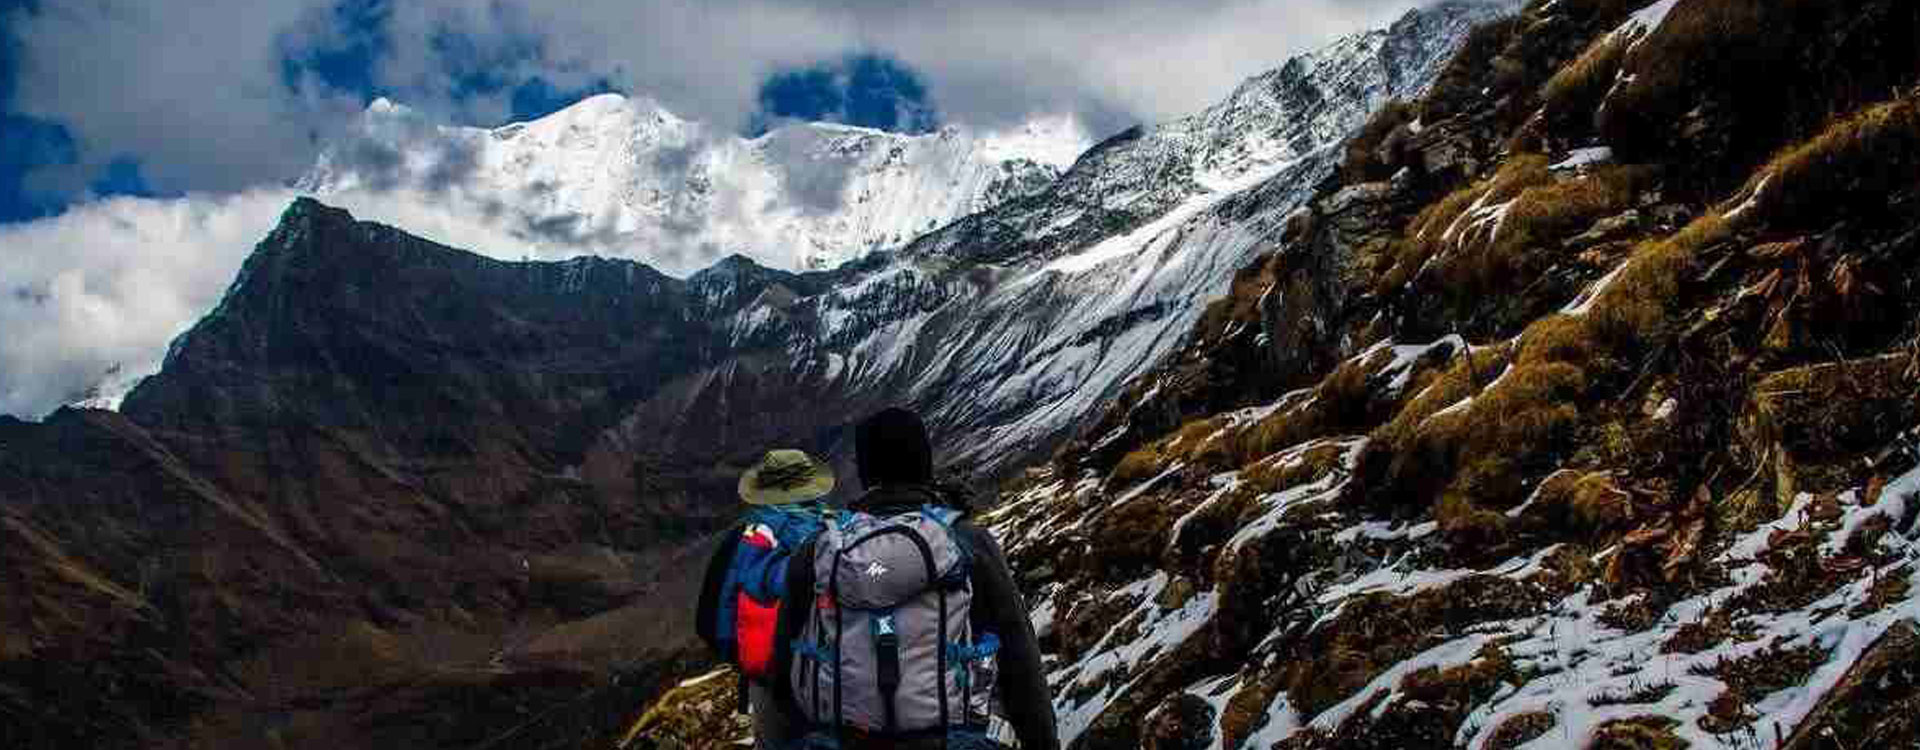 Nepal Trekking, Trekking in Nepal, Trekking in Nepal Packages